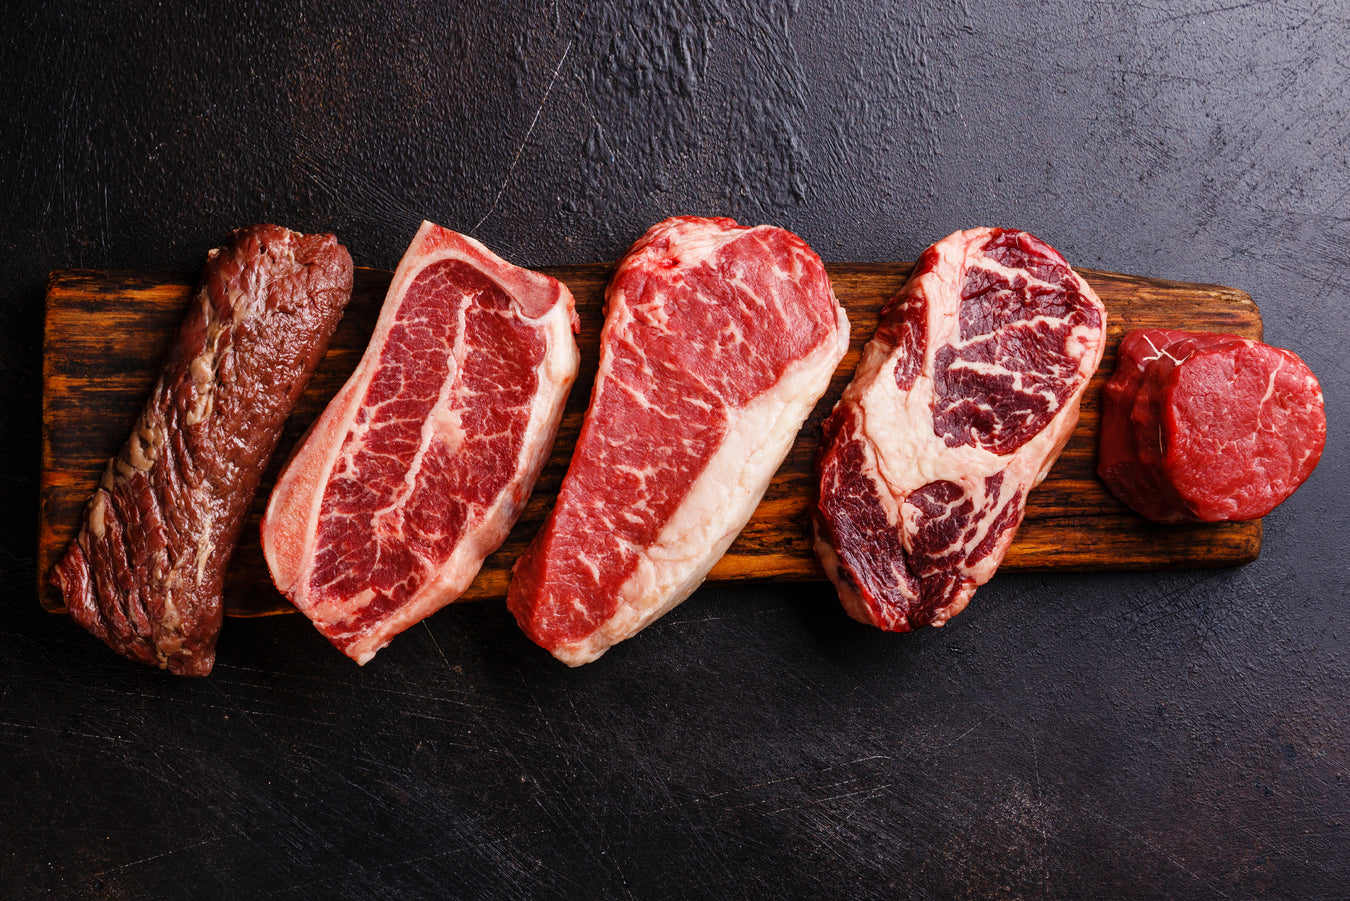 28-Day Aged USDA Angus Beef Steaks - Meat Depot | Buy Quality Meats and Seafood Online